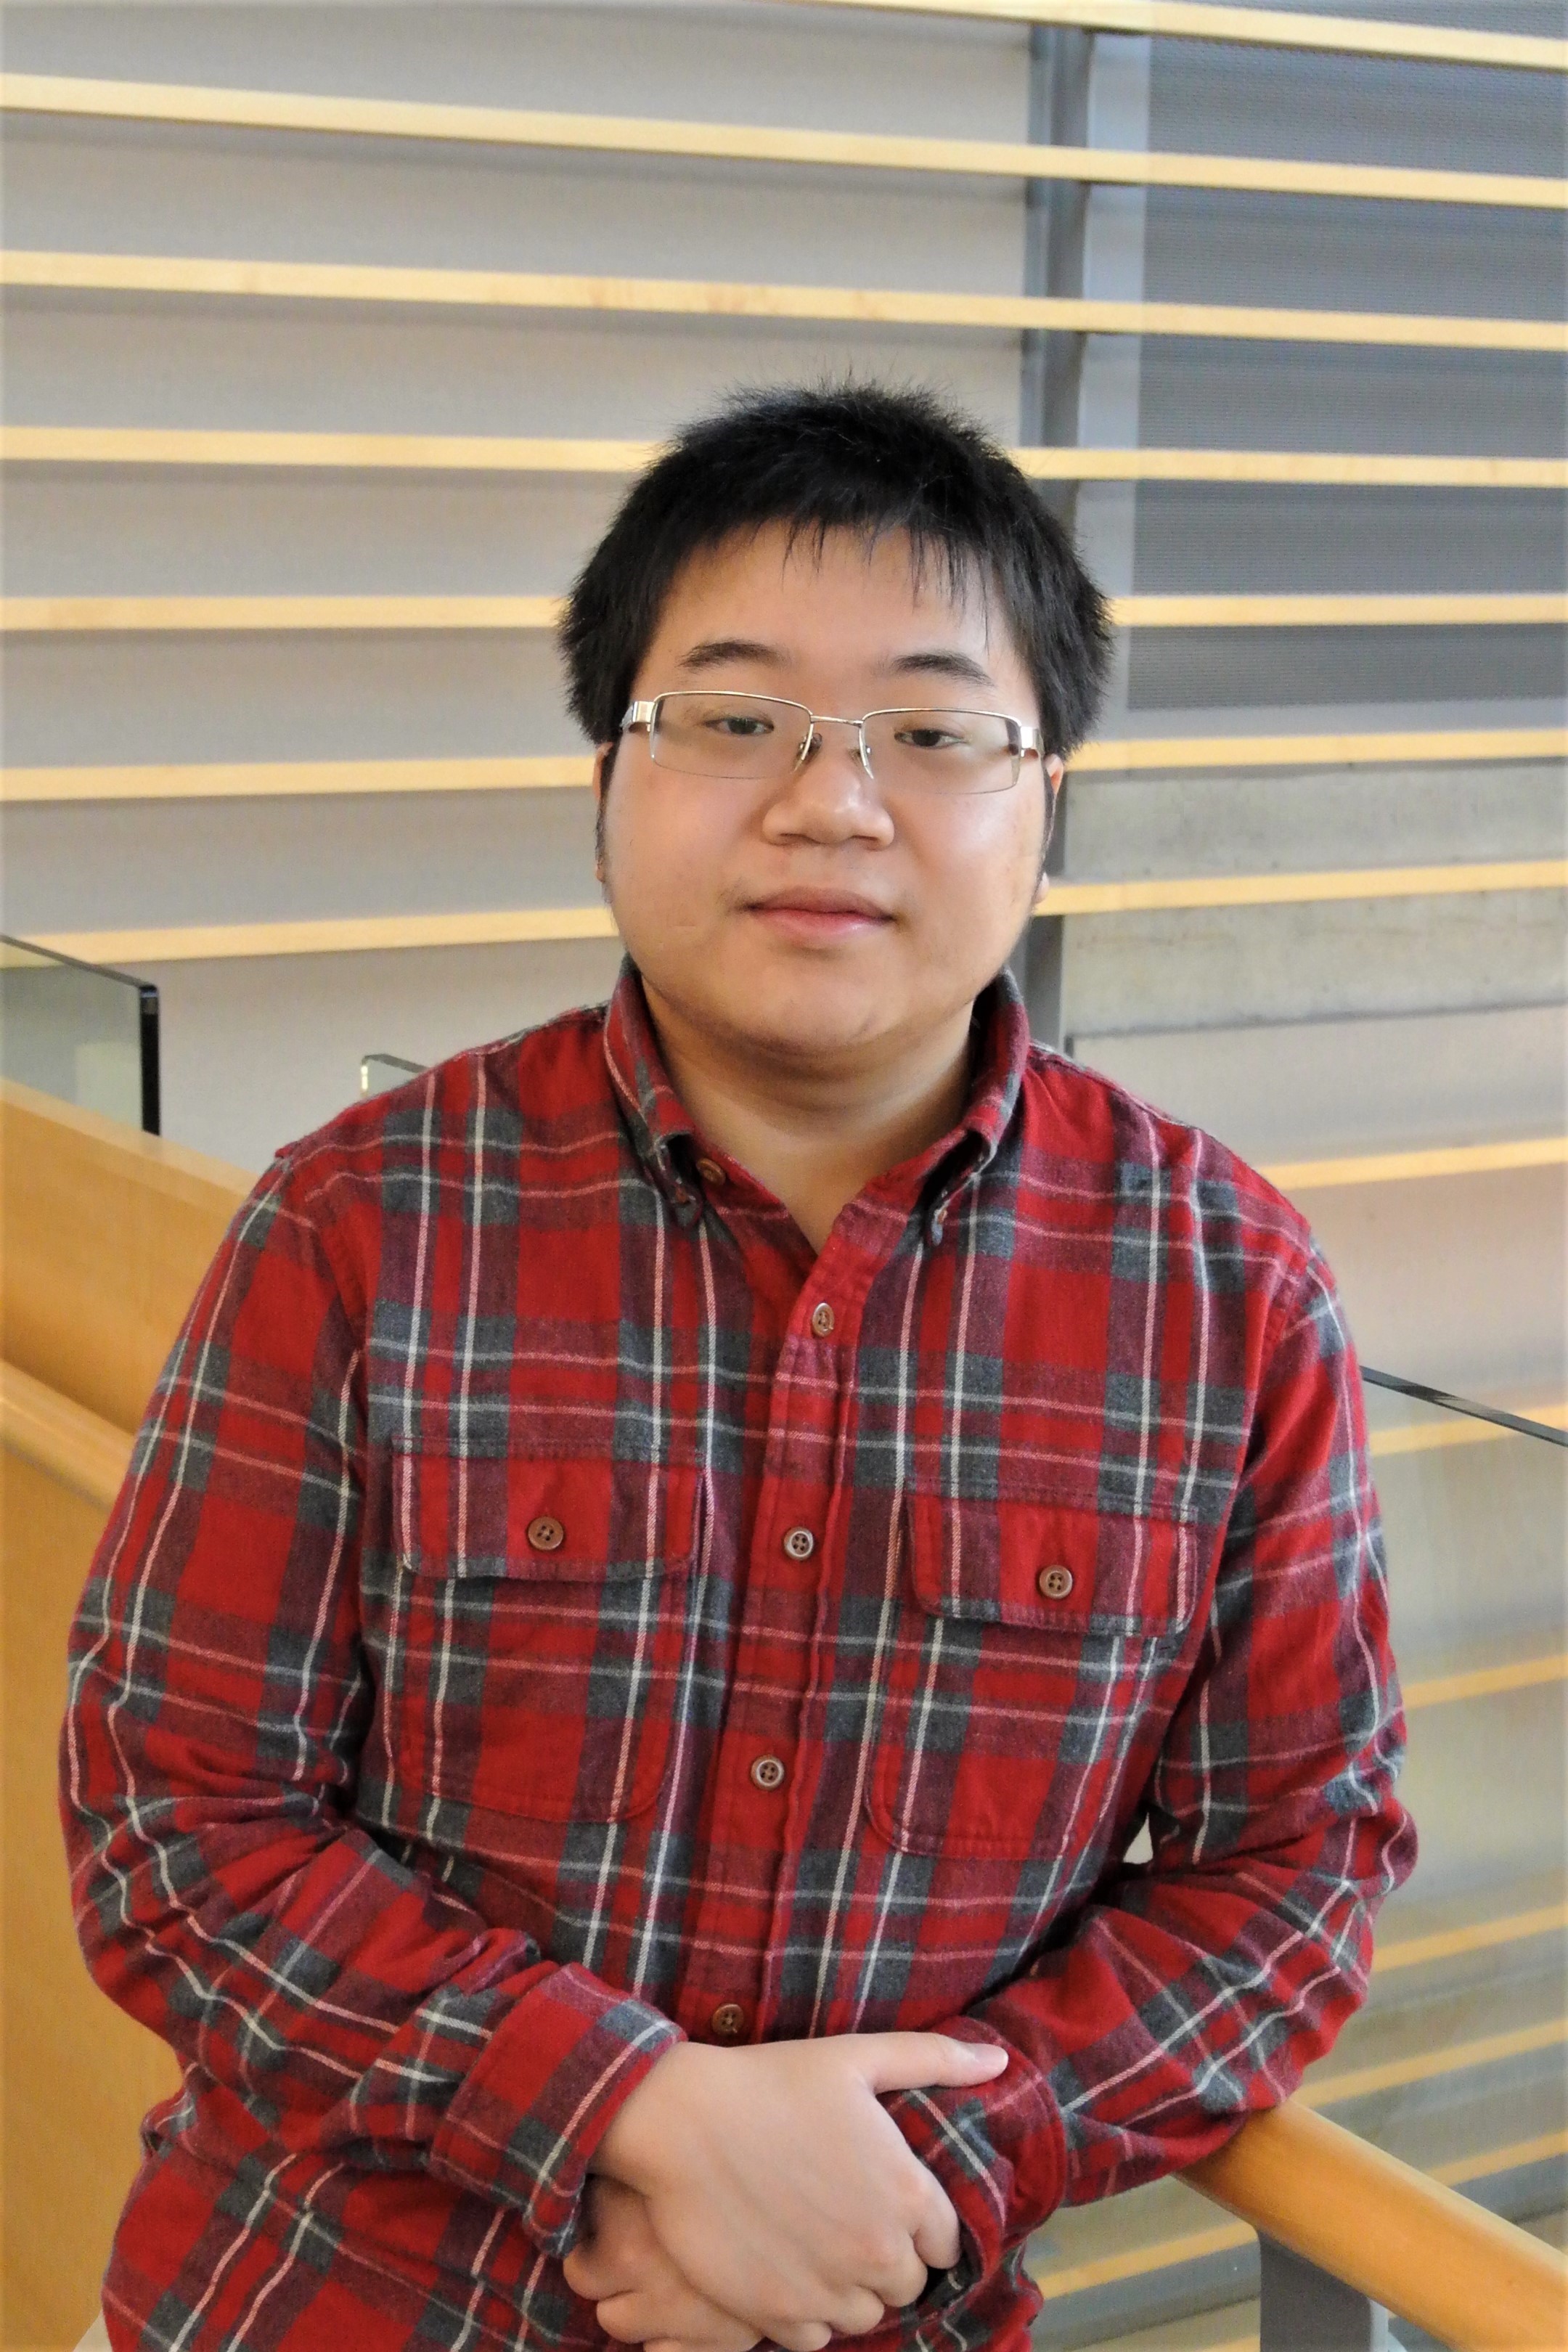 A portrait of Leon Chow, a computer science student